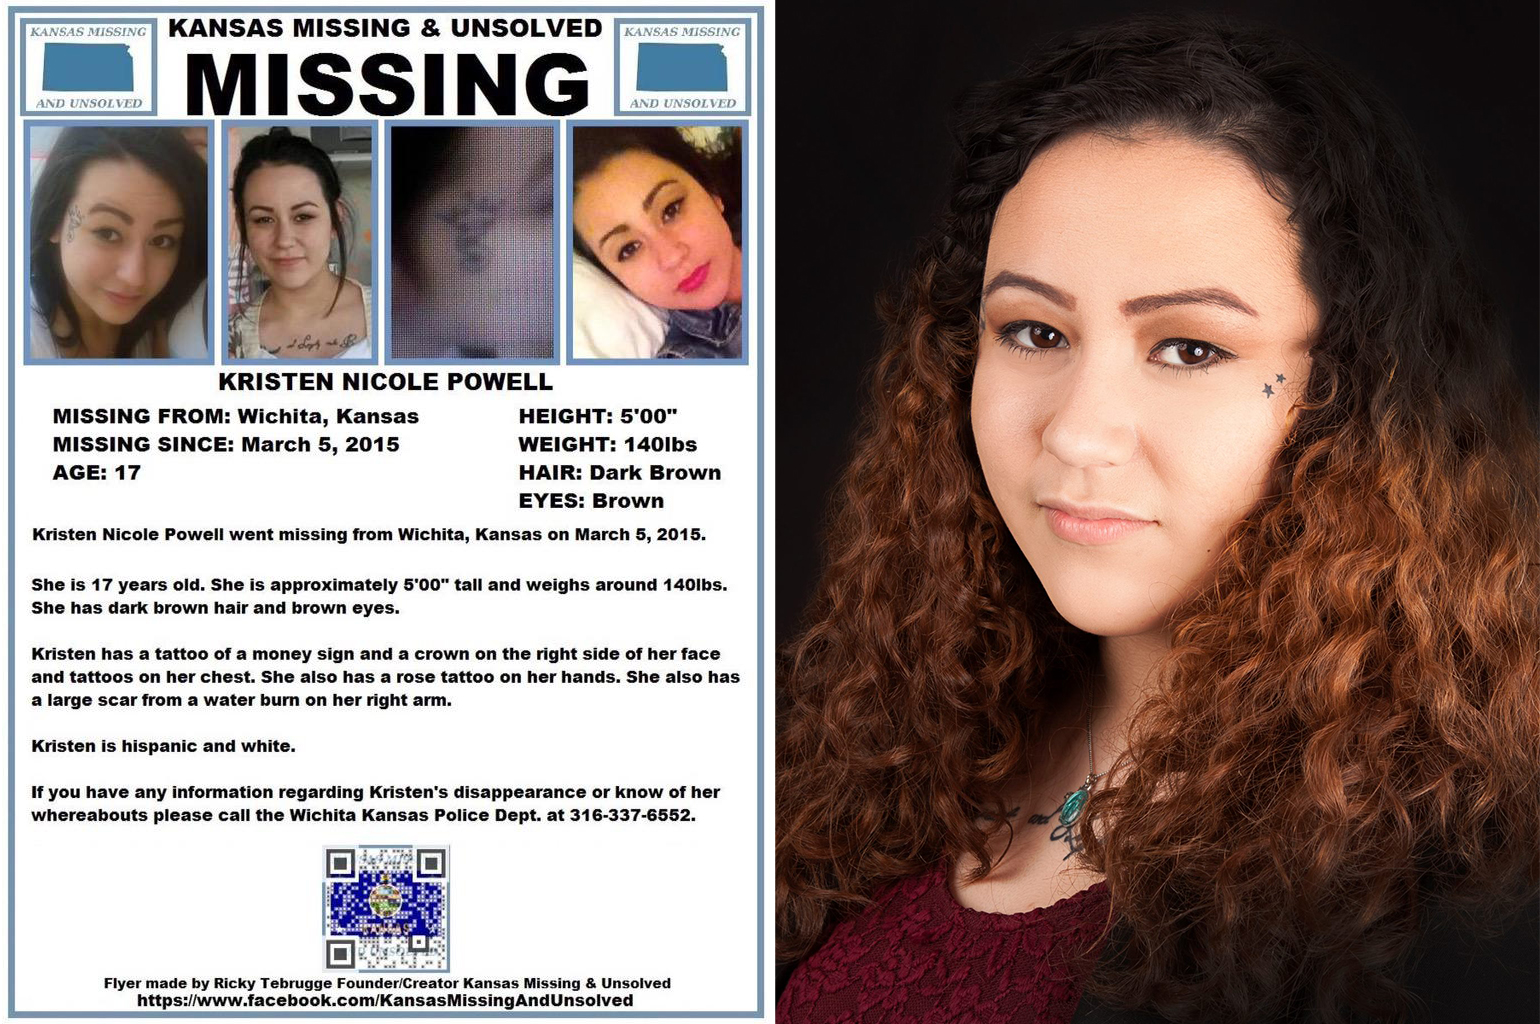 A photo mashup of a missing person flyer for a teen girl and a portrait photo of a woman